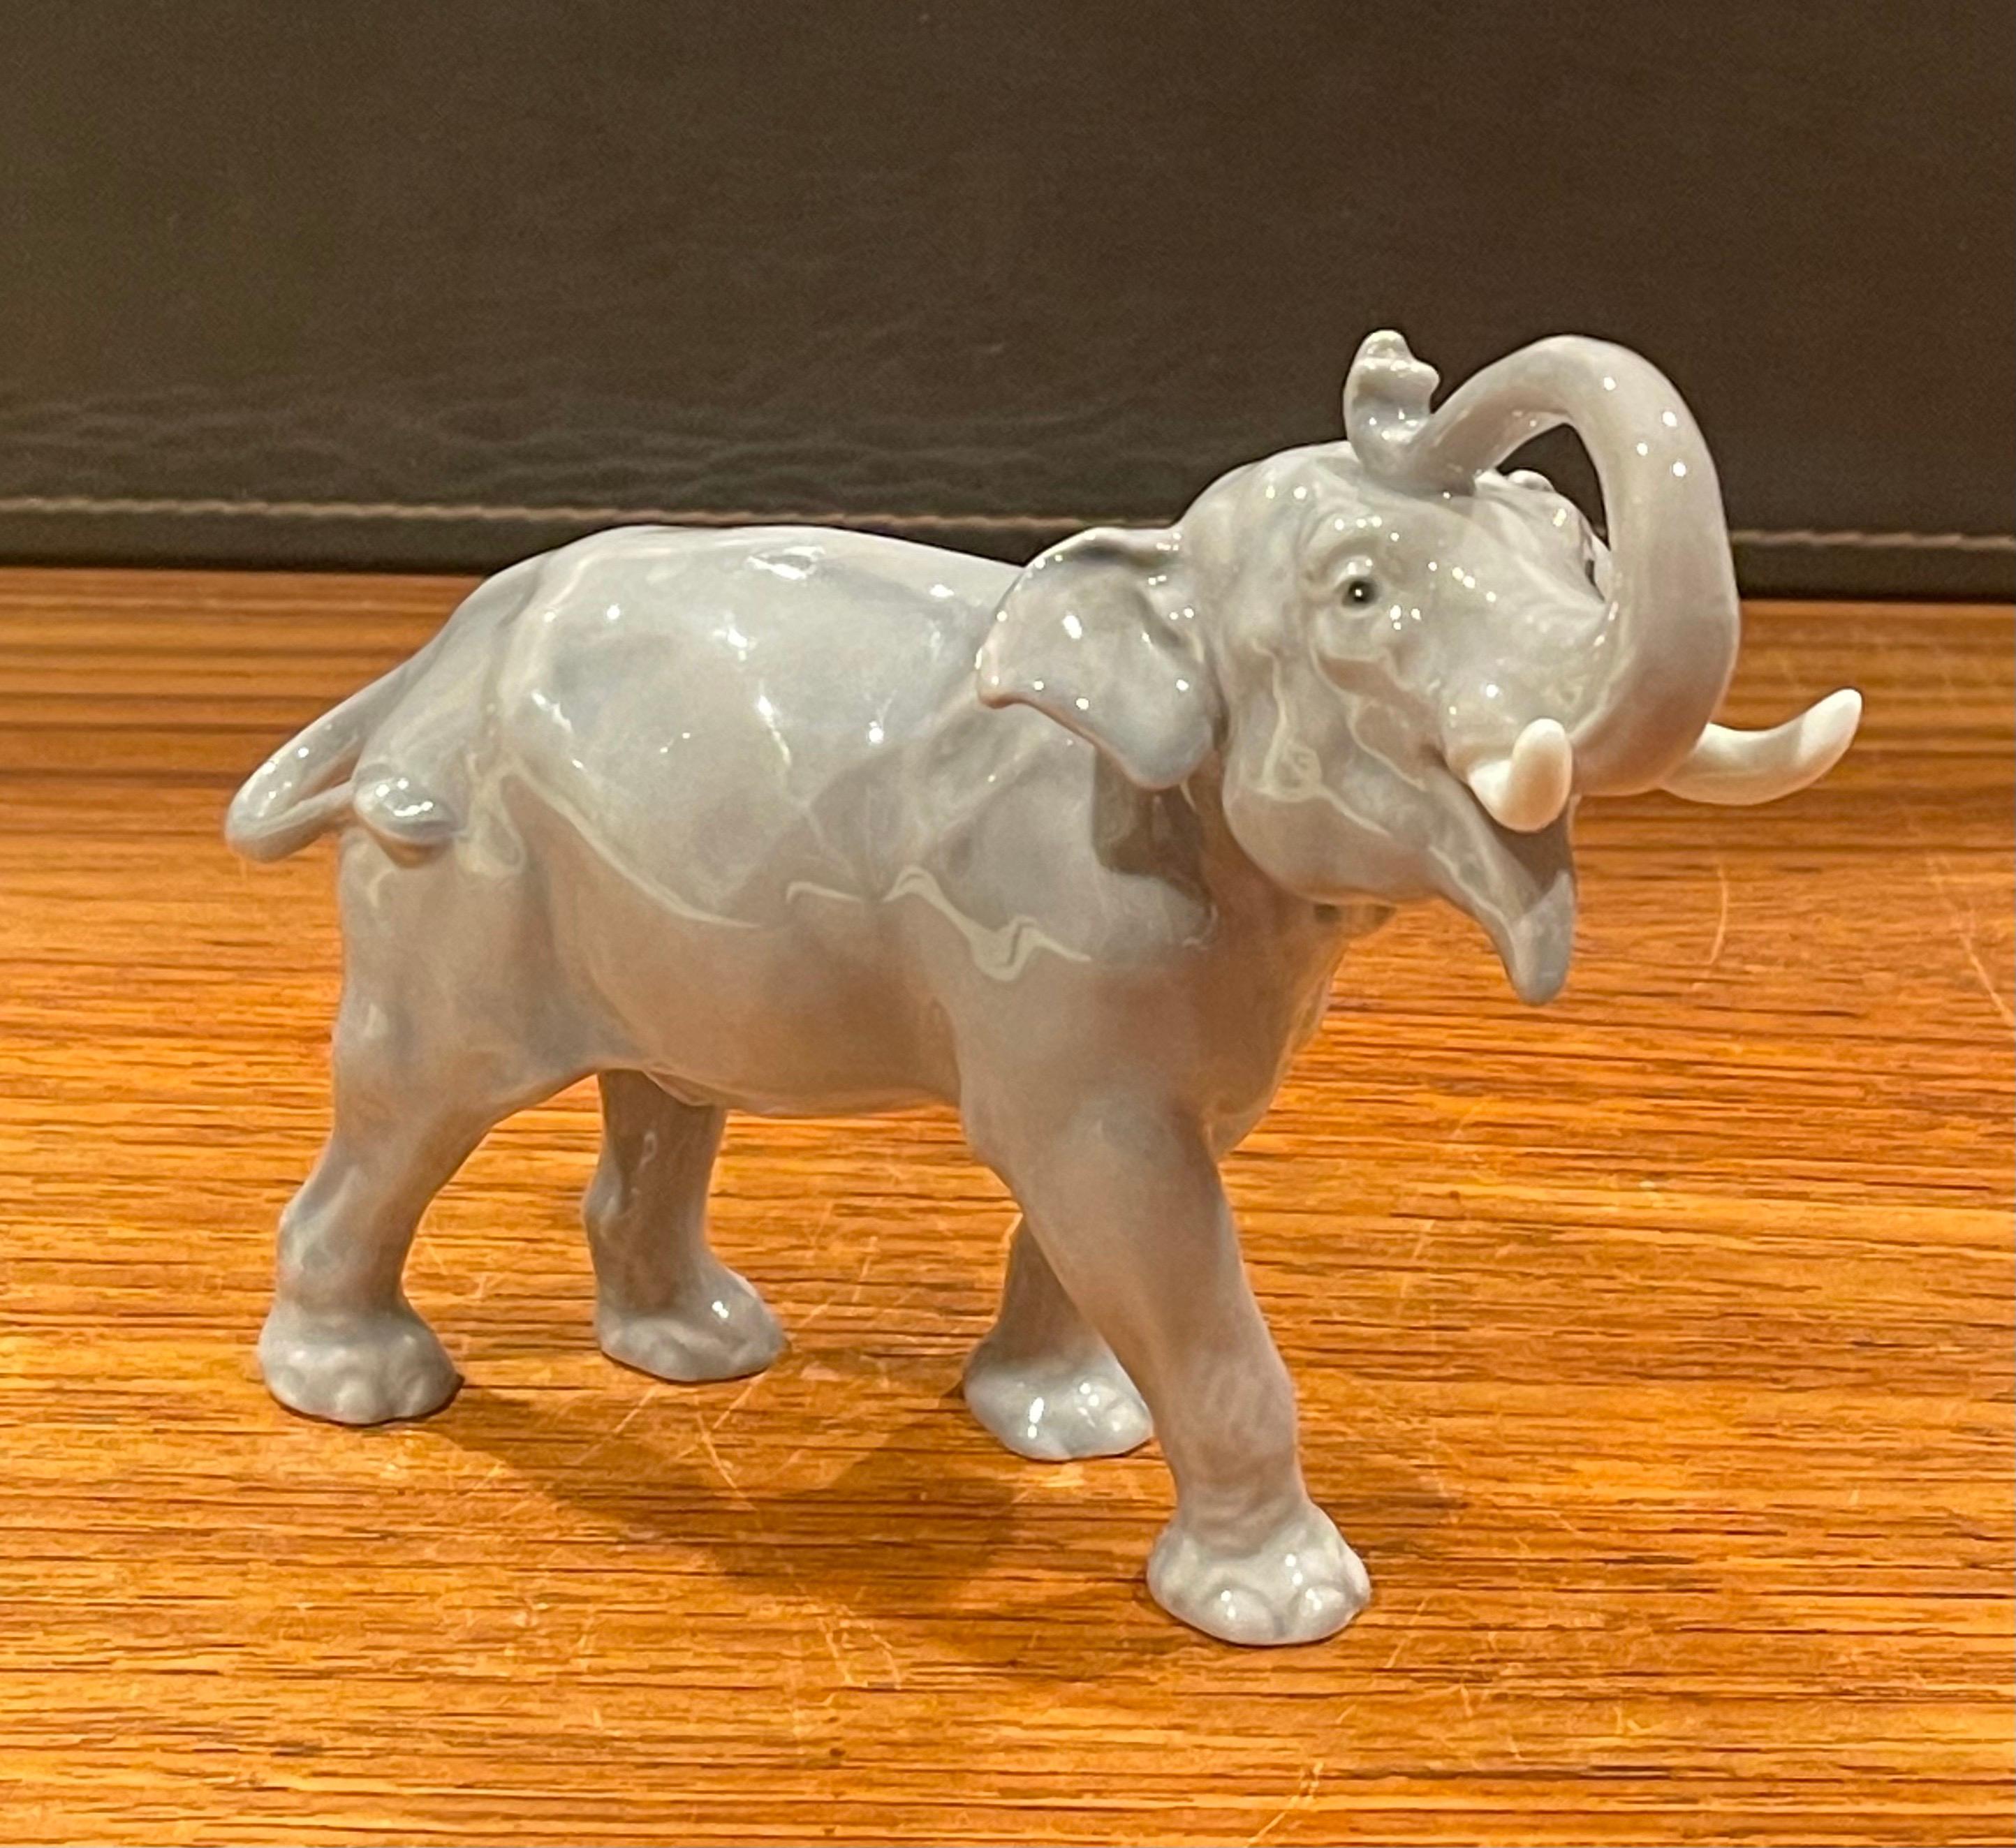 Hand Painted Porcelain Elephant Sculpture by Bing & Grondahl For Sale 1